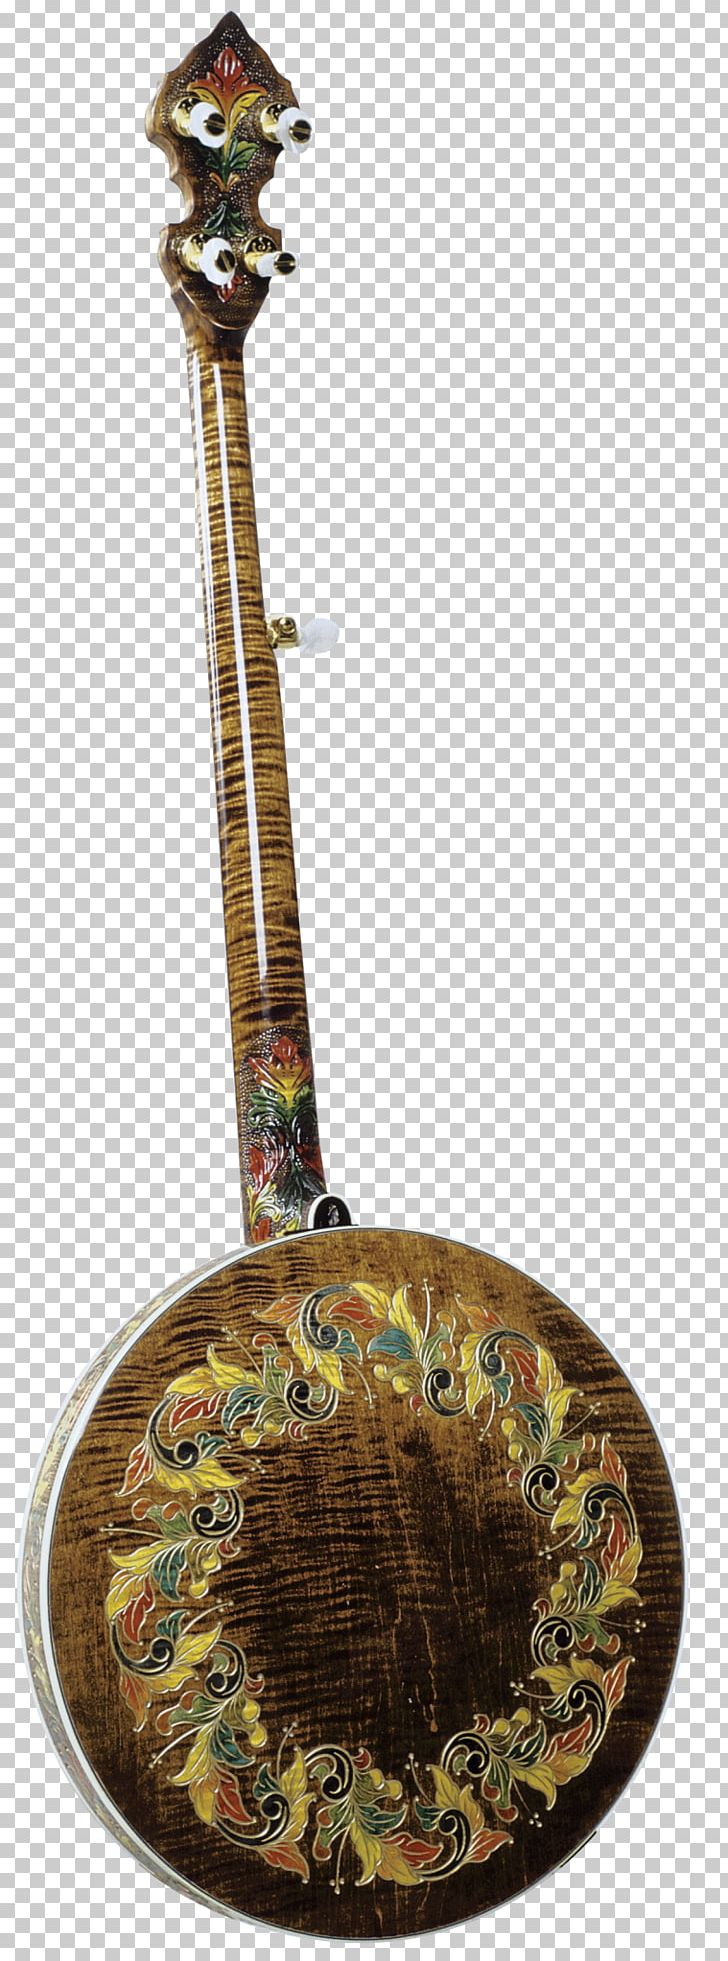 Plucked String Instrument String Instruments Musical Instruments PNG, Clipart, Gradegold Catering Ltd, Music, Musical Instrument, Musical Instruments, Plucked String Instrument Free PNG Download